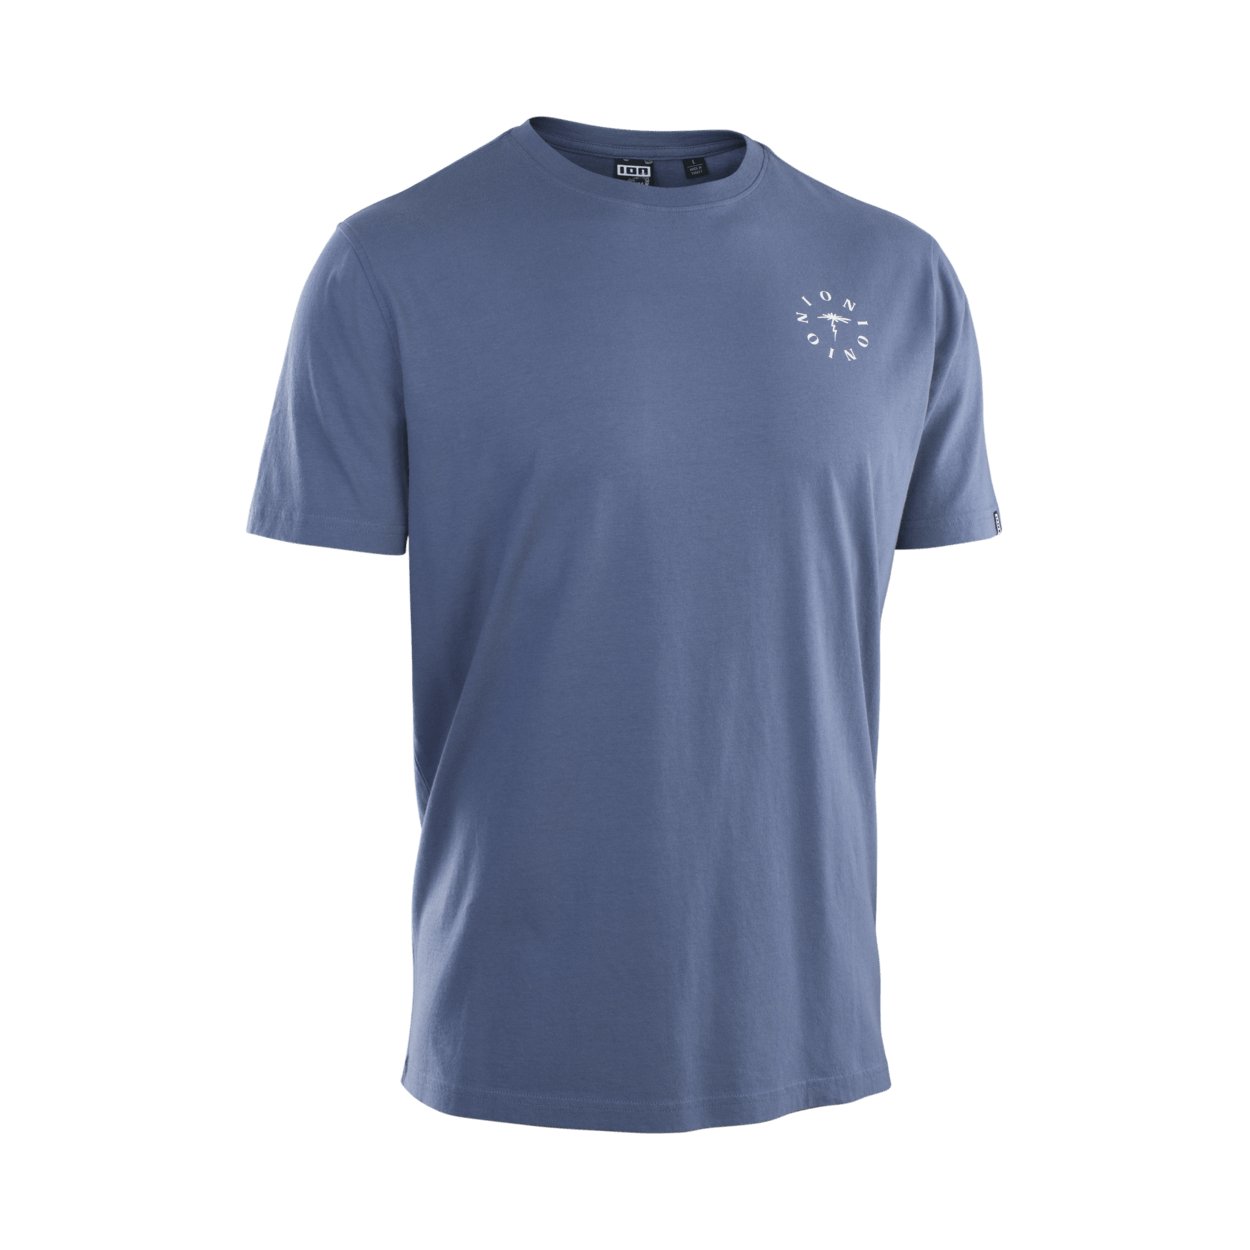 ION Tee Vibes SS men 2023 - Worthing Watersports - 9010583102740 - Apparel - ION Bike